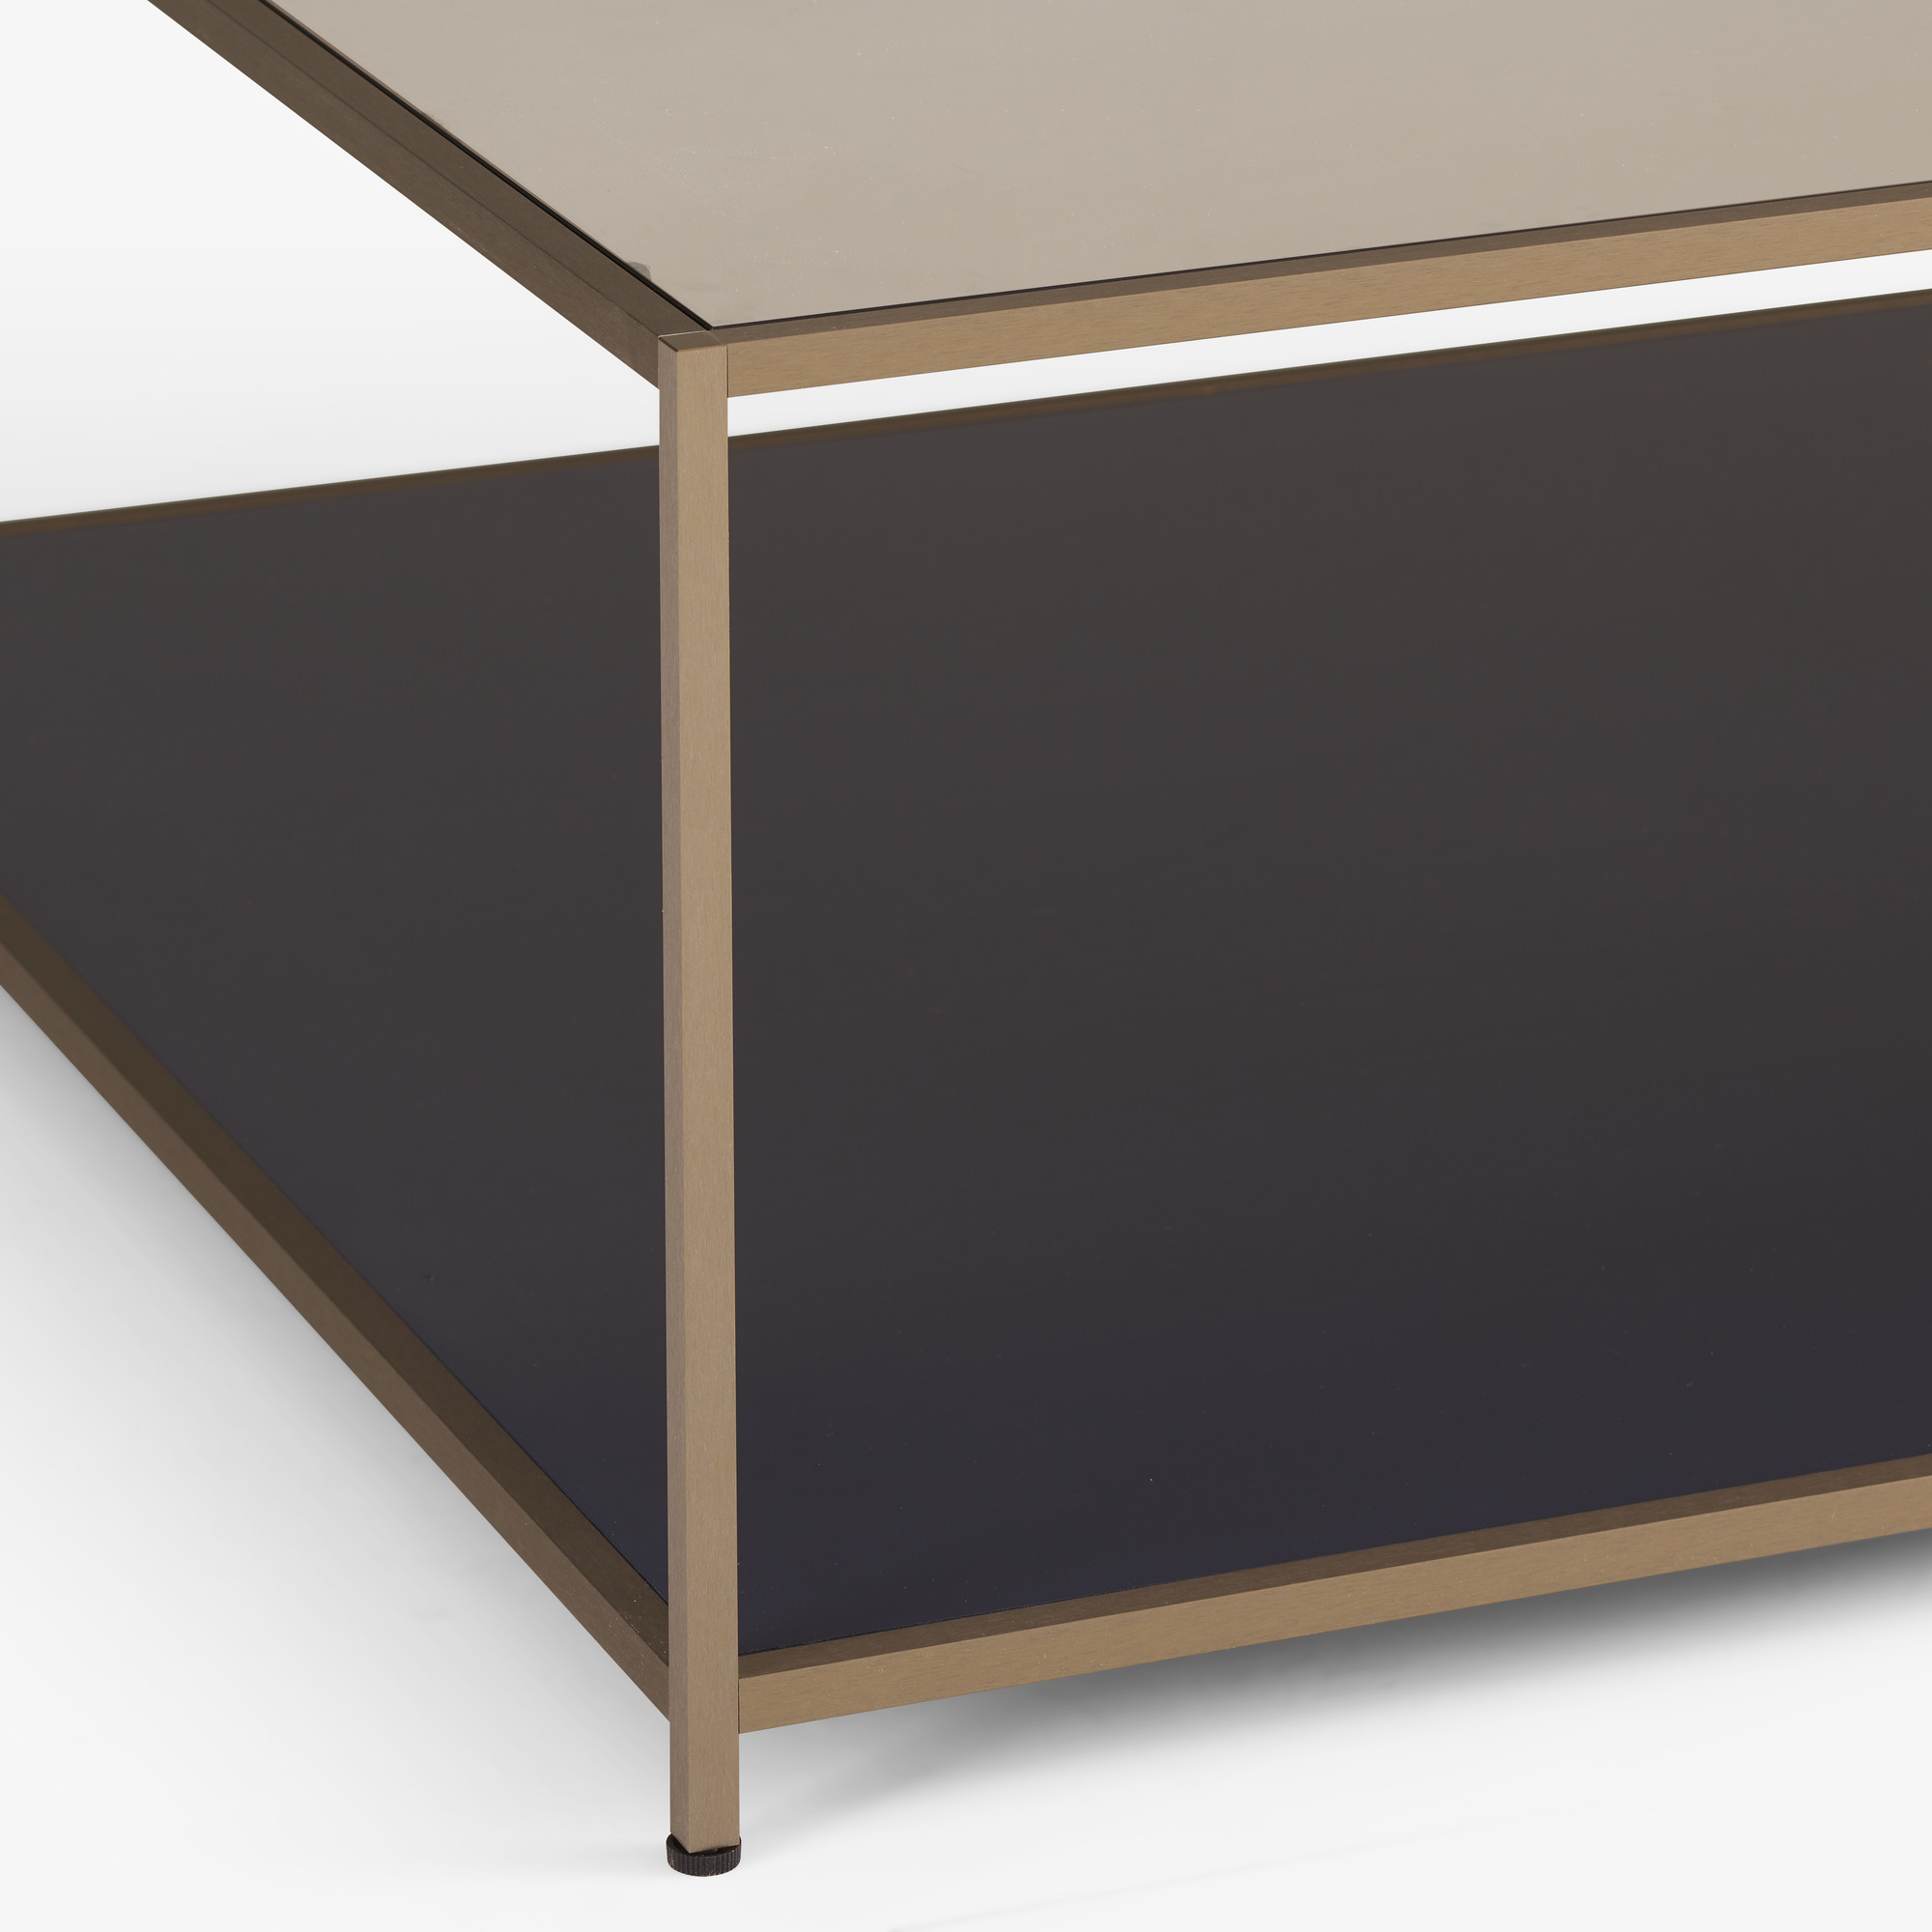 Image Square low table 3